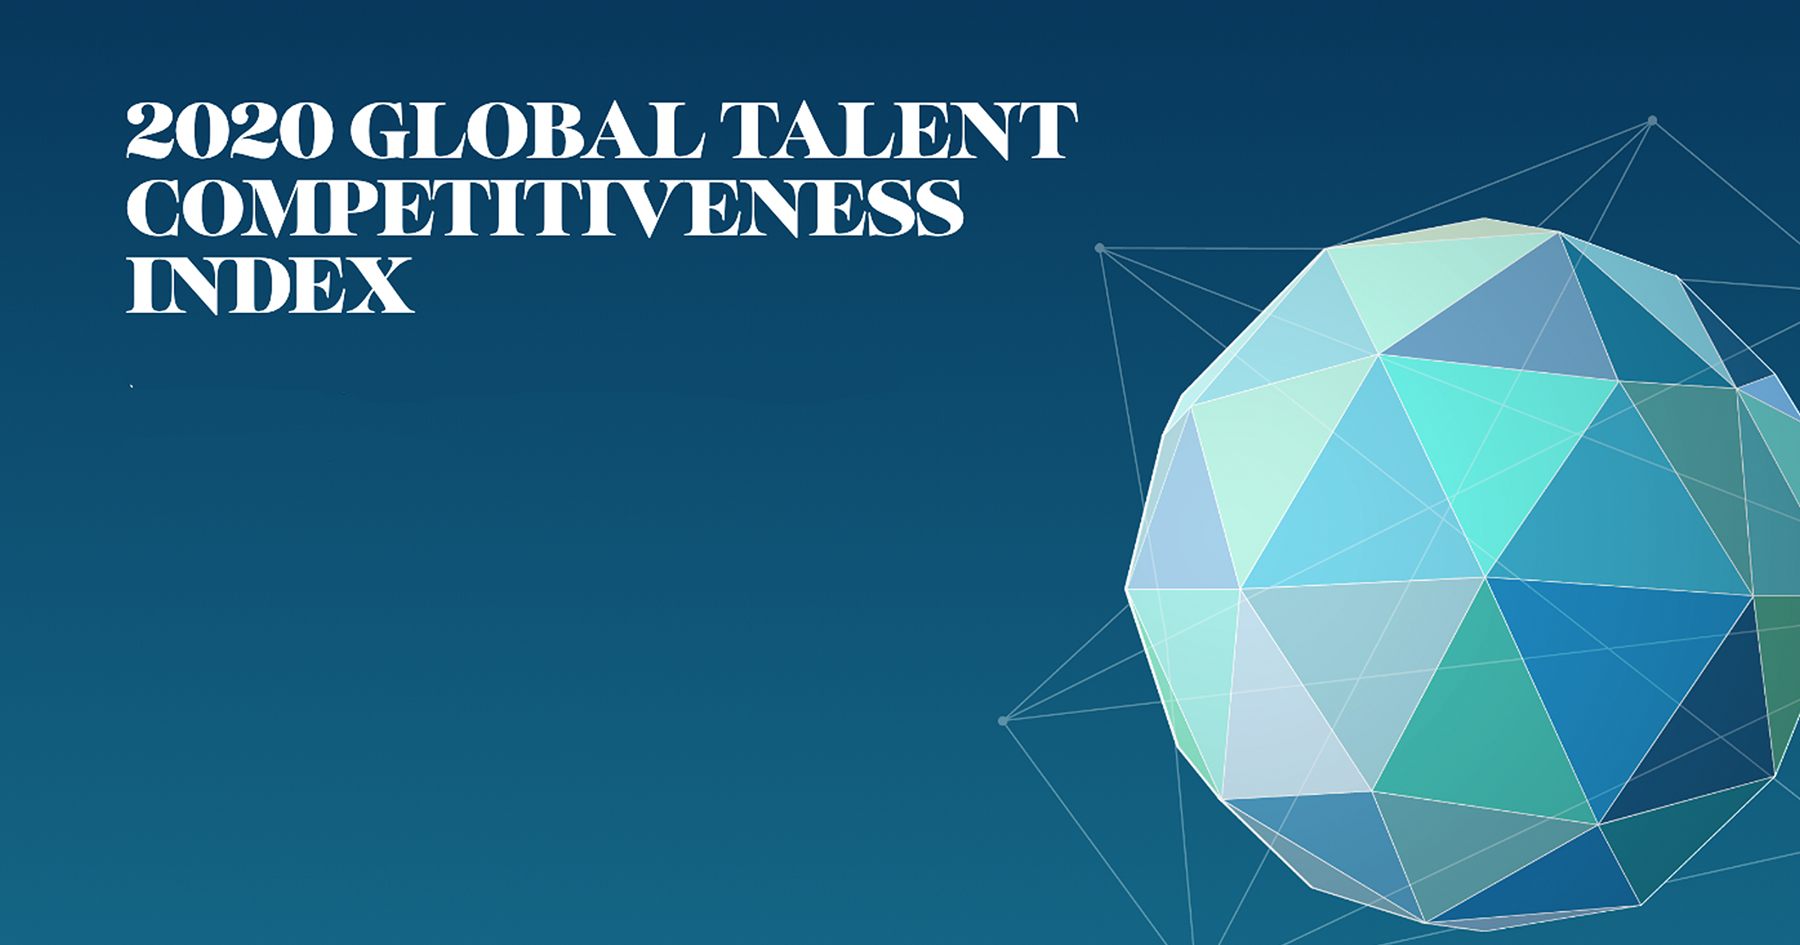 GLOBAL TALENT COMPETITIVENESS INDEX